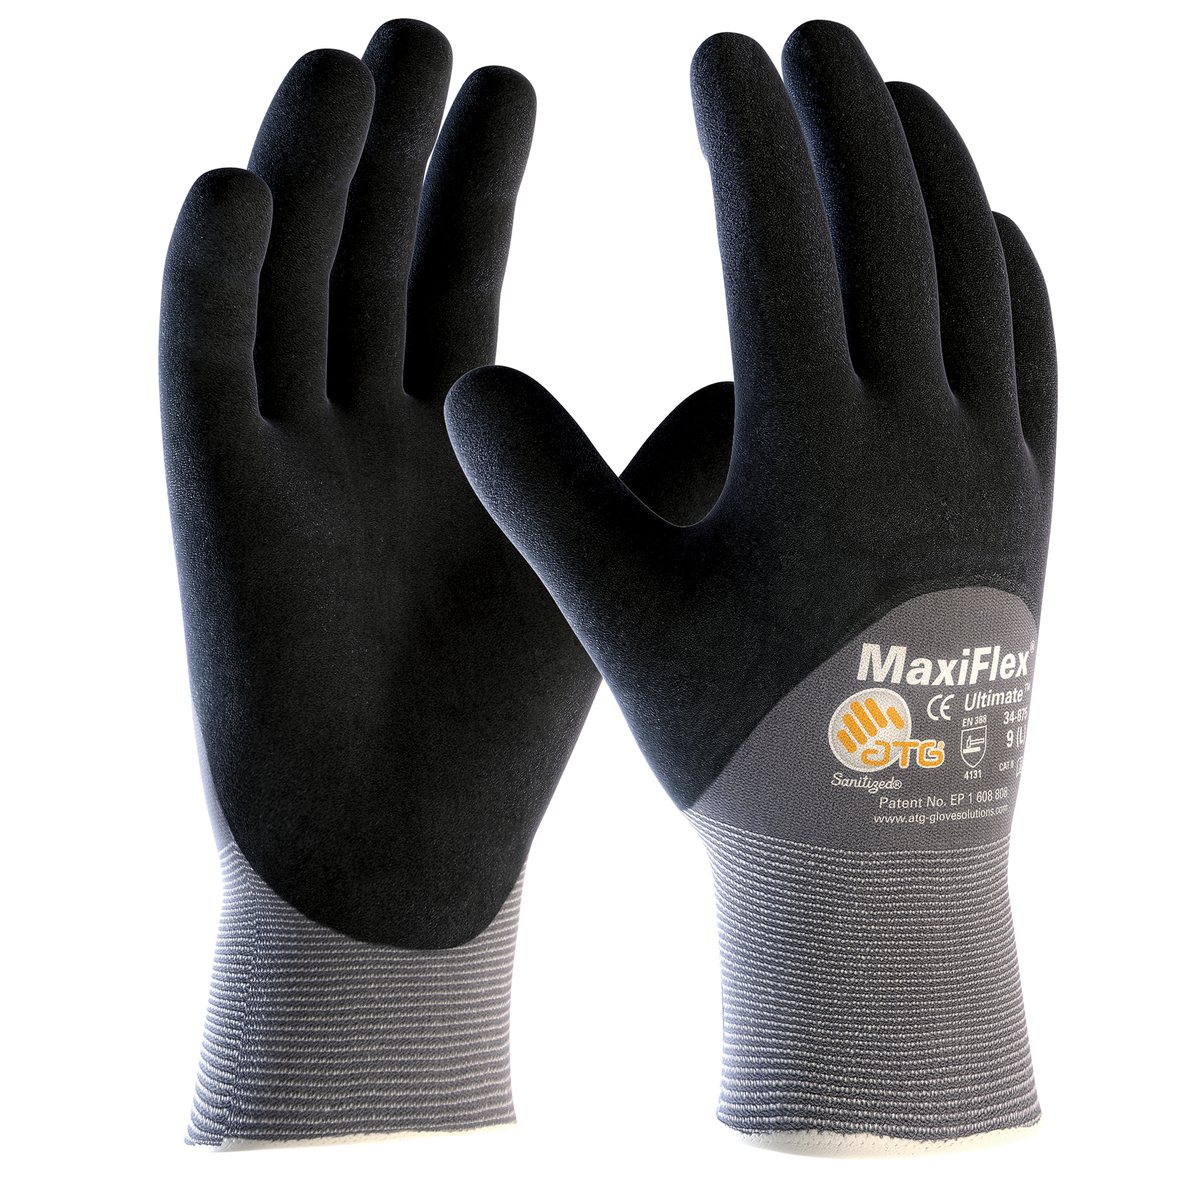 DELTA PLUS KNITTED GLOVES FOAM NITRILE COATING PROTECTIVE WORK SAFETY MECHANIC 